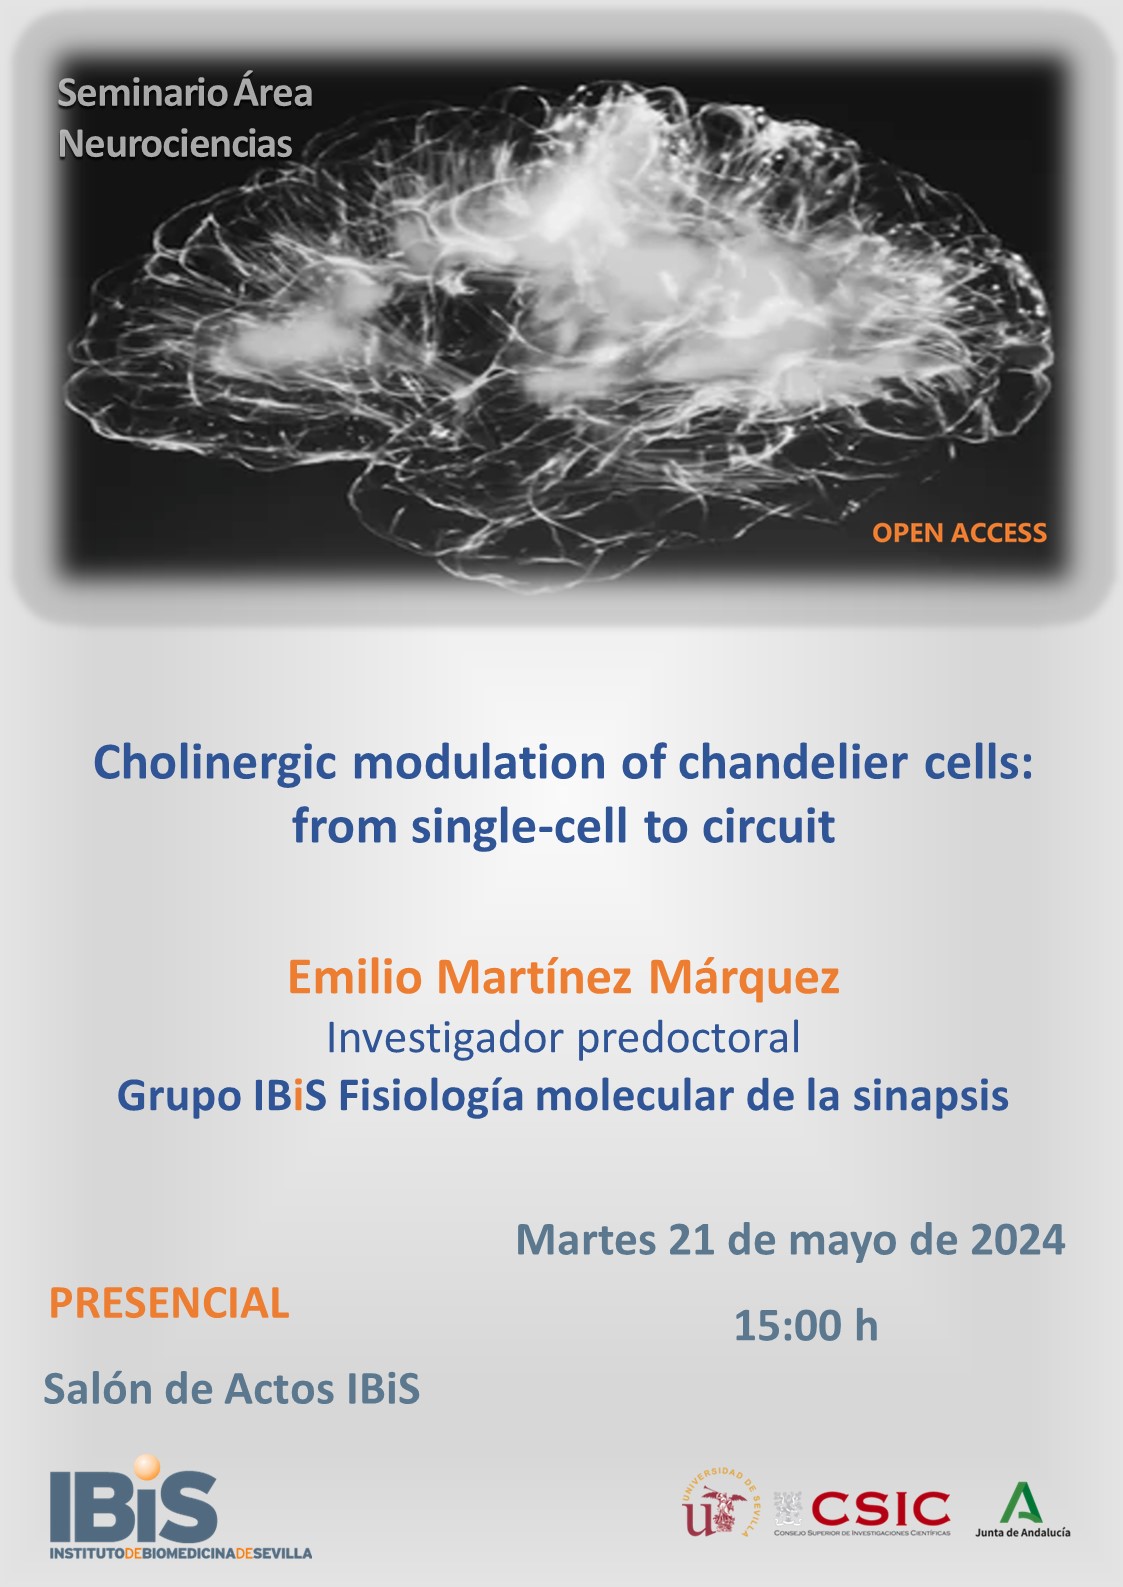 Poster: Cholinergic modulation of chandelier cells: from single-cell to circuit